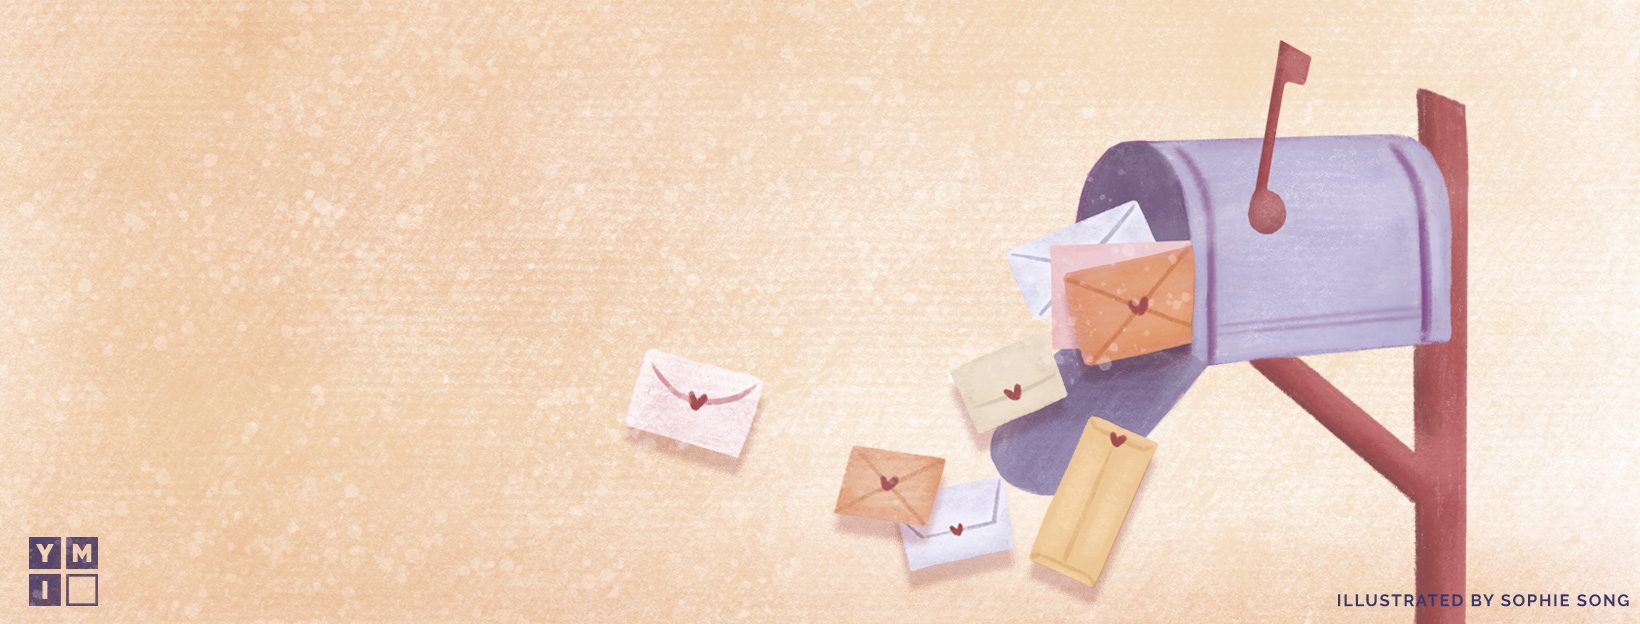 Illustration of a letter box bursting with love letters